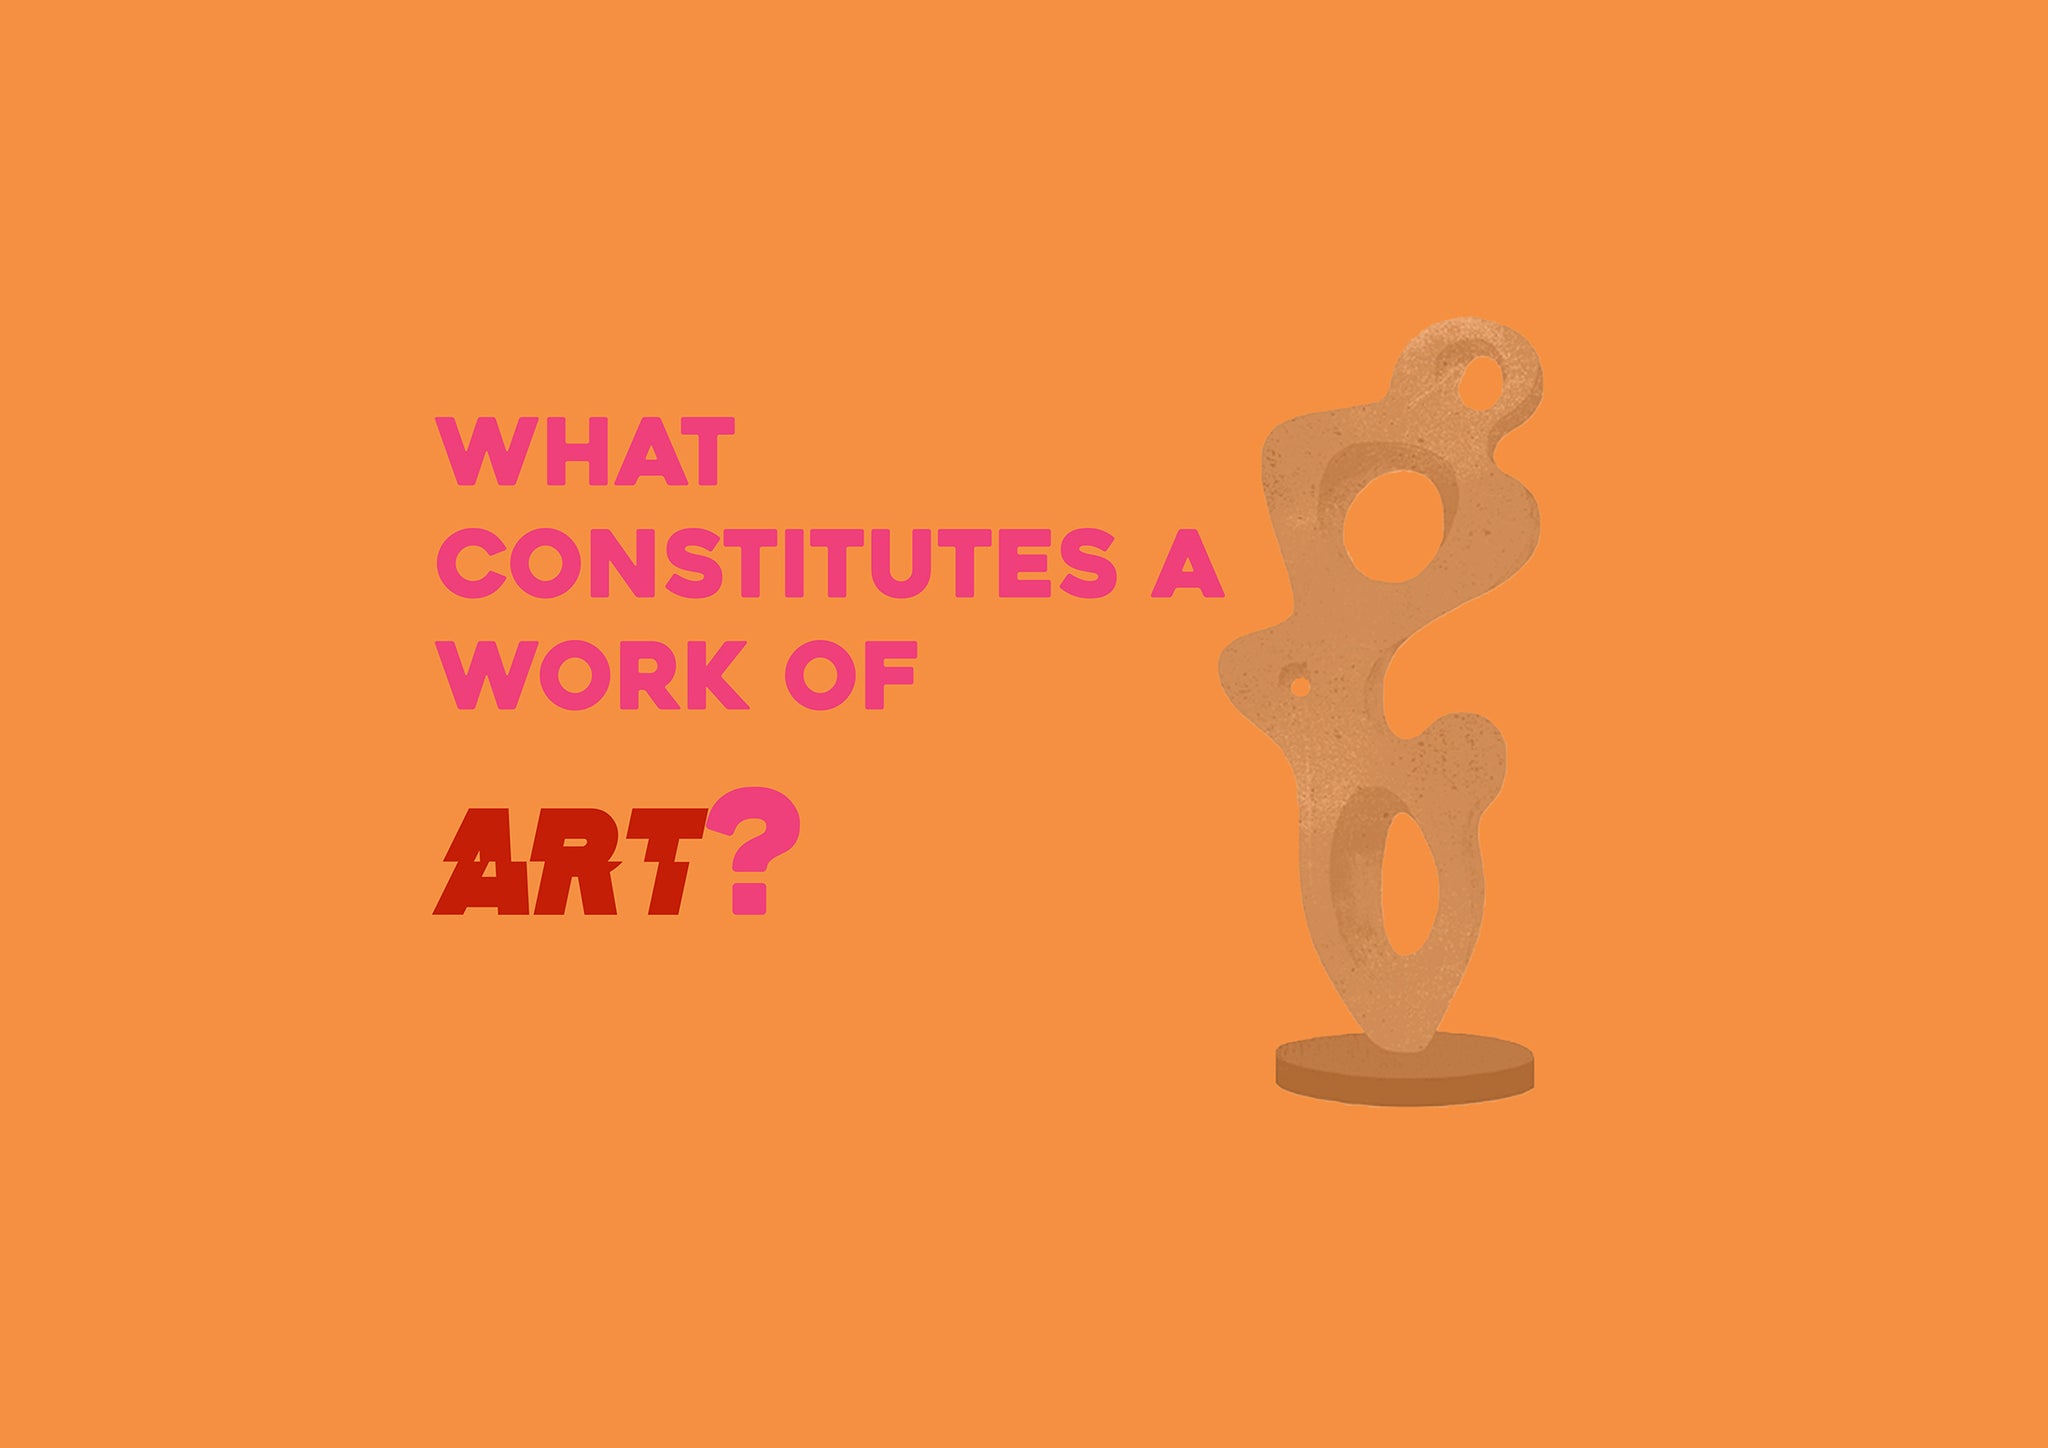 What constitutes a work of art?